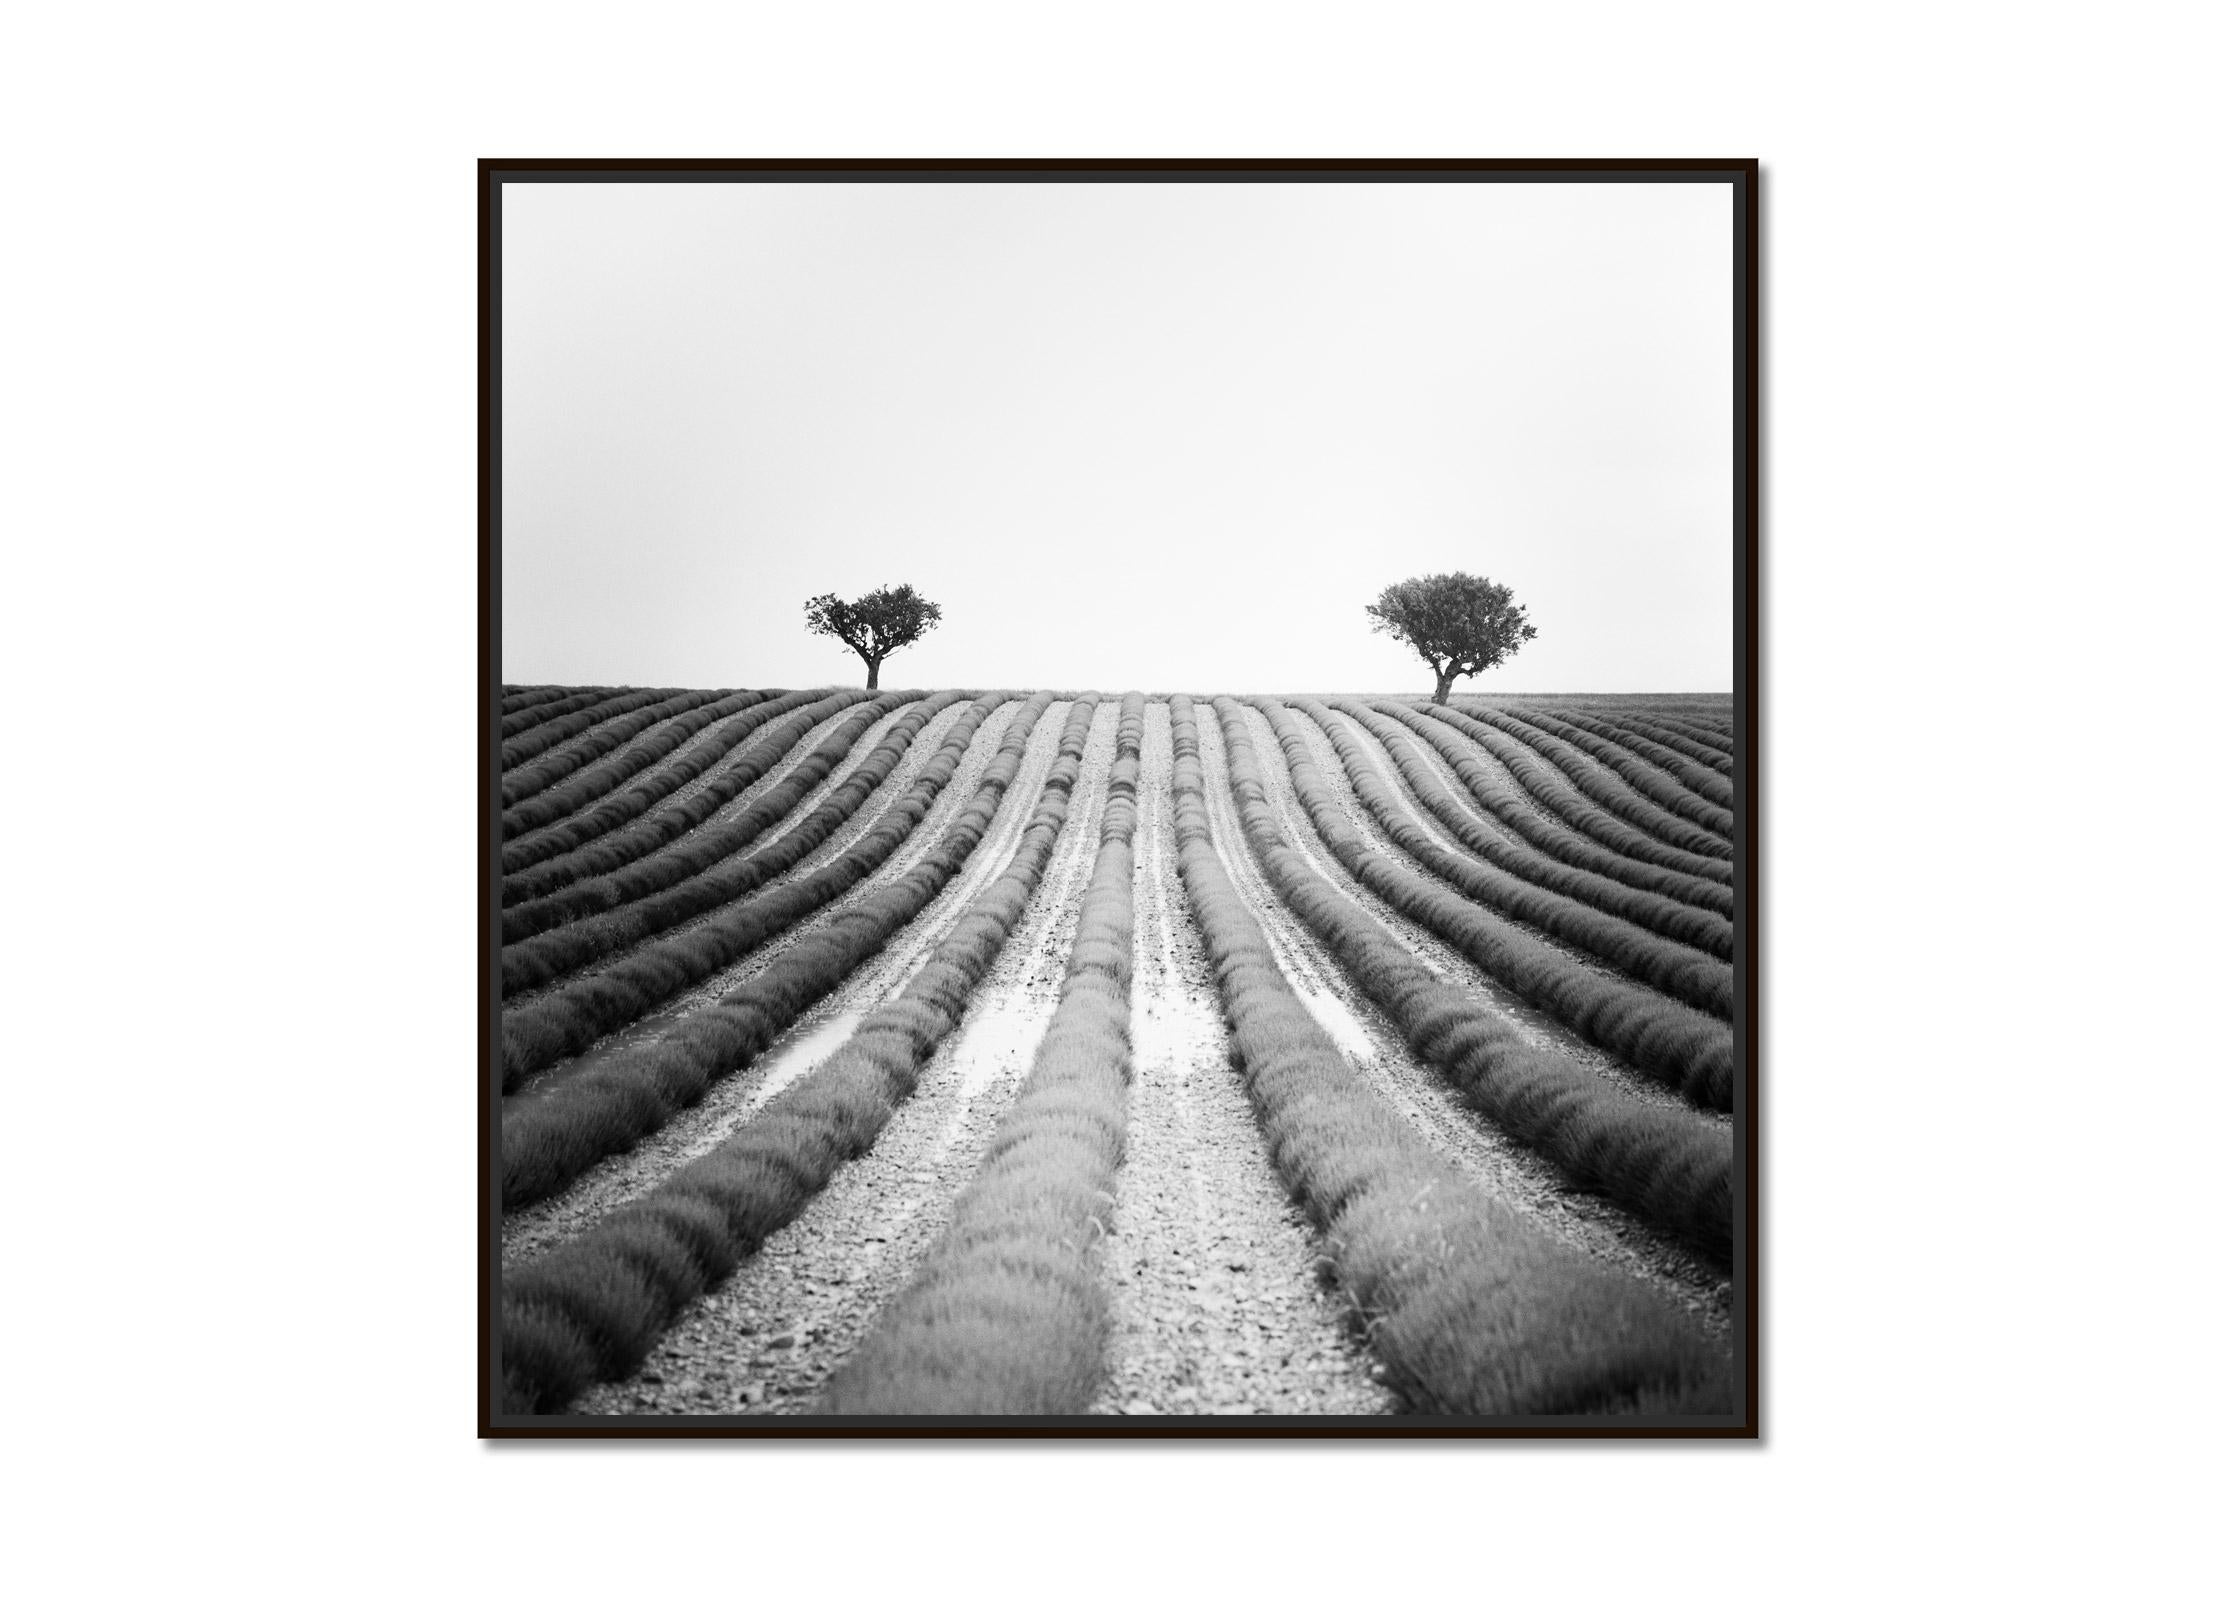 Lavender Field, two Trees, Provence, France, black white landscape photography - Photograph by Gerald Berghammer